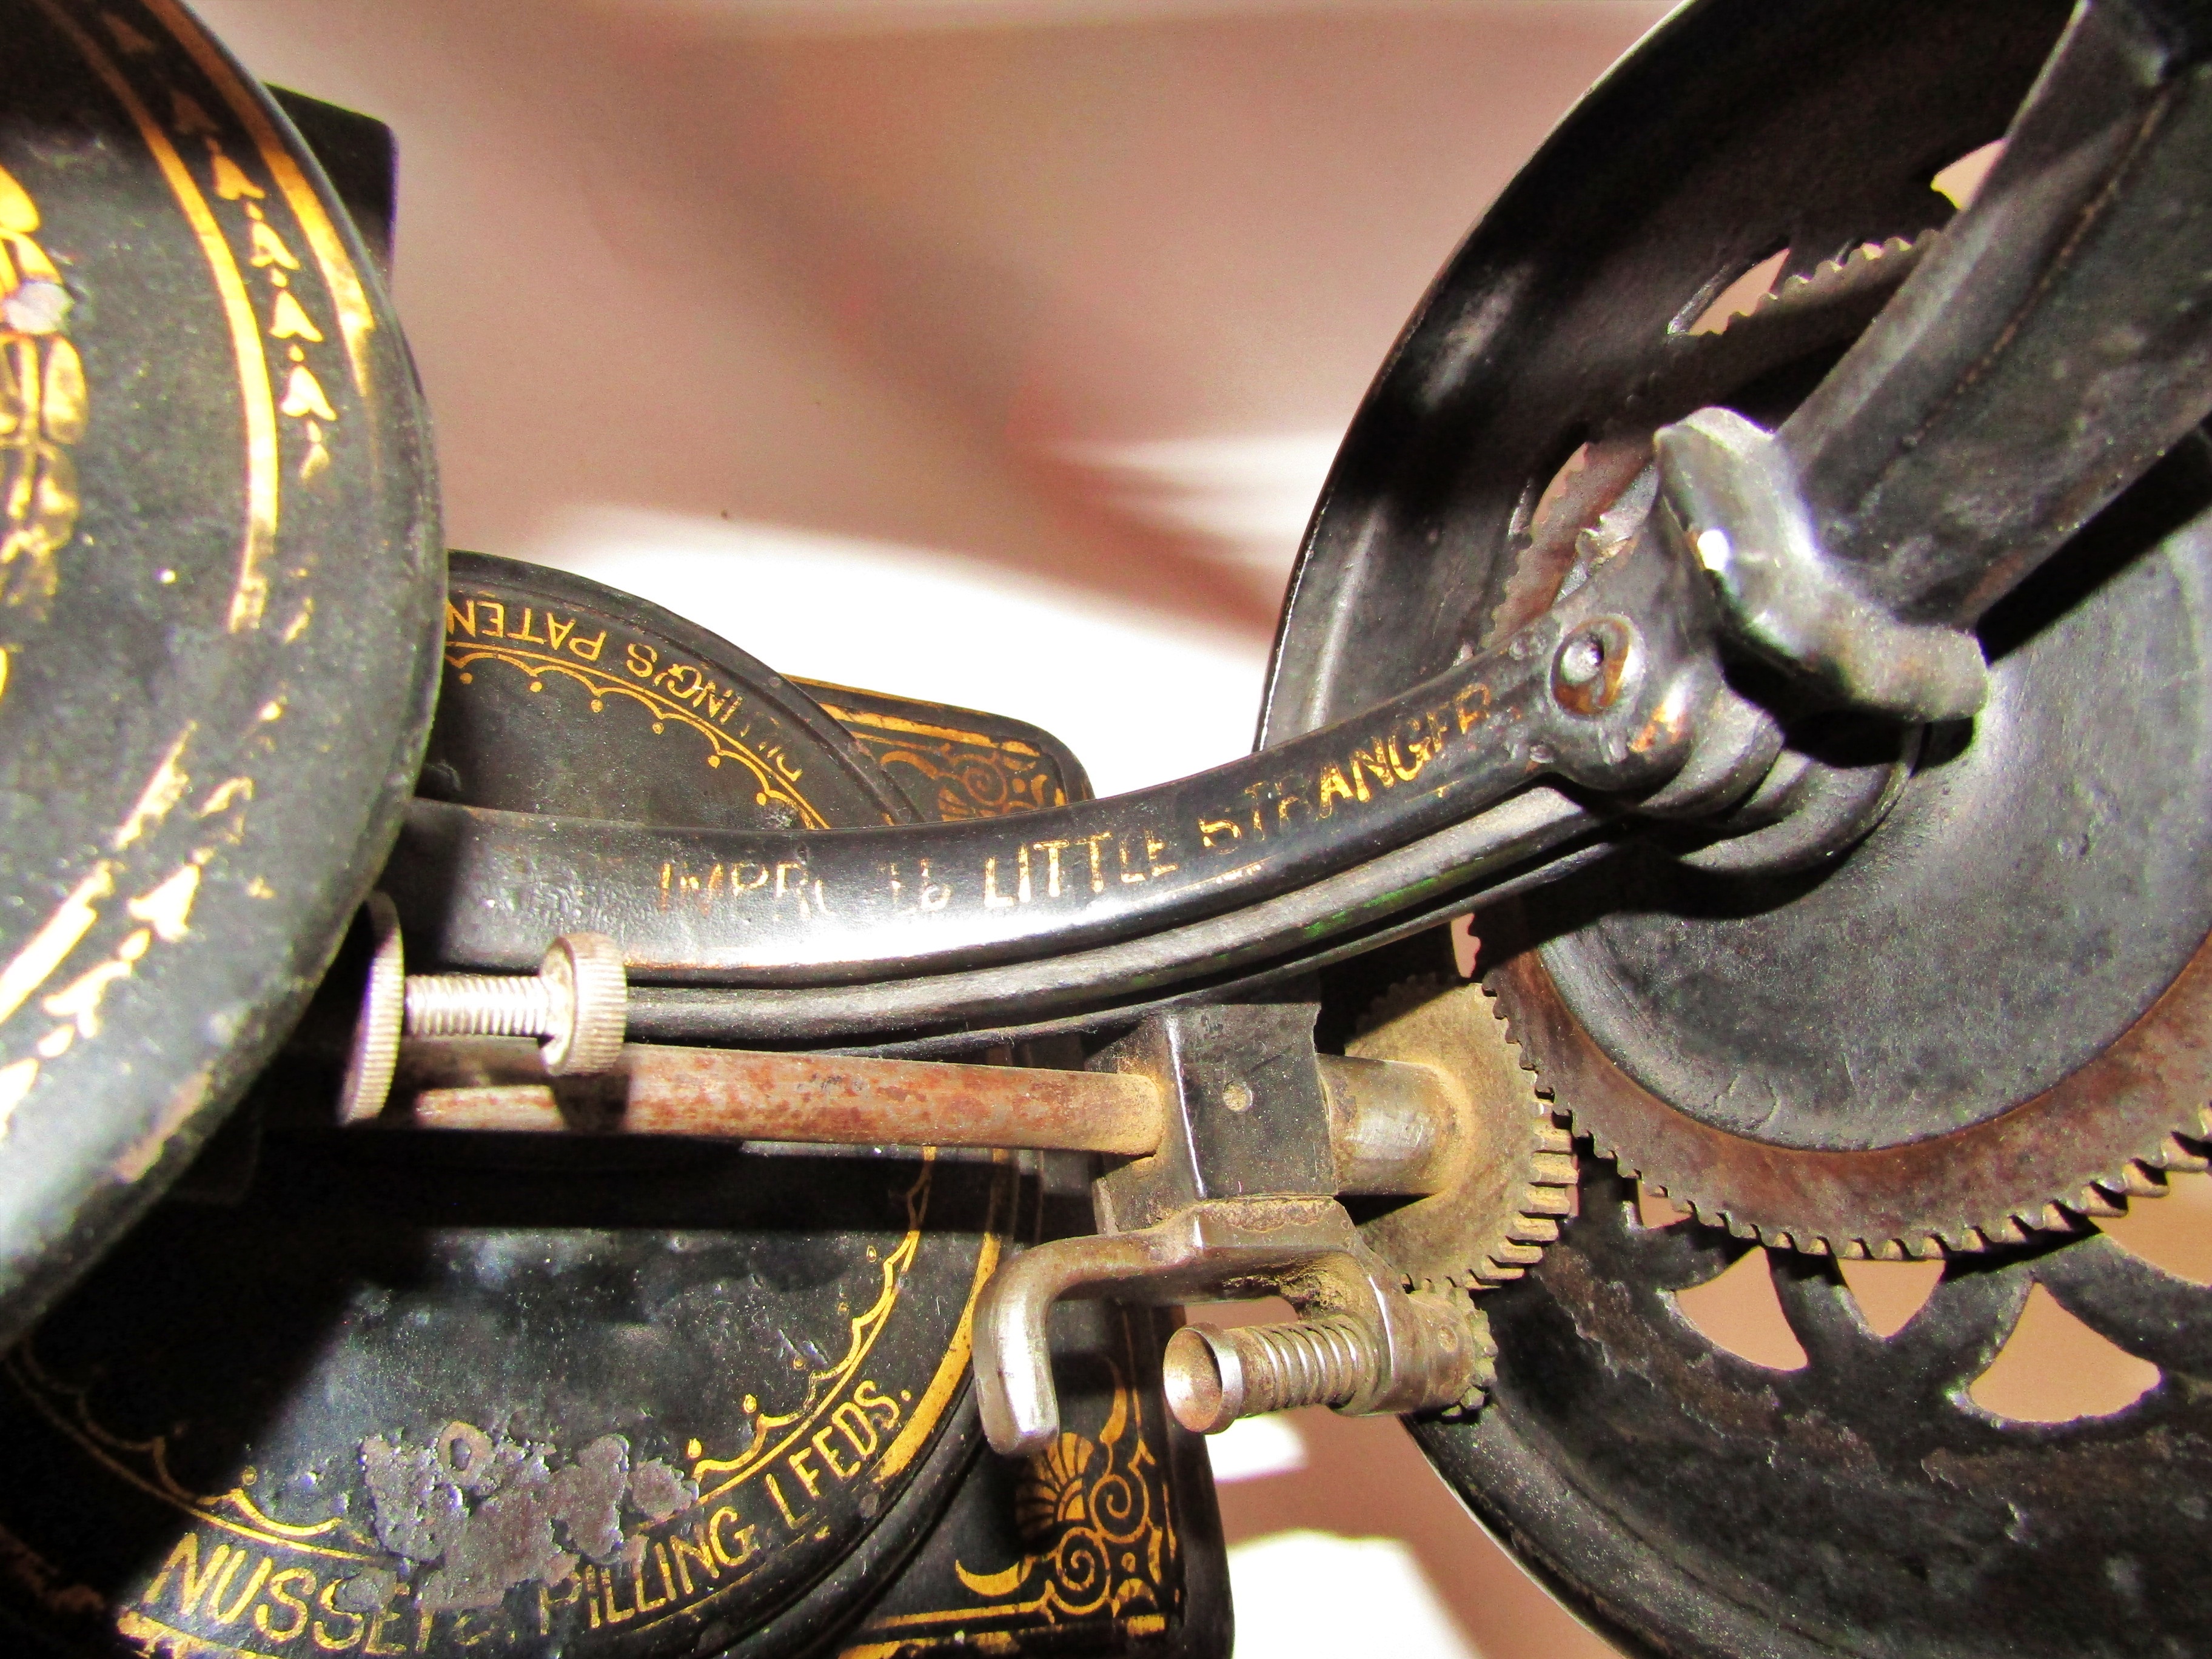 A scarce Nussey & Pilling 'Little Stranger' Victorian sewing machine with gilt decoration, on metal - Image 12 of 13